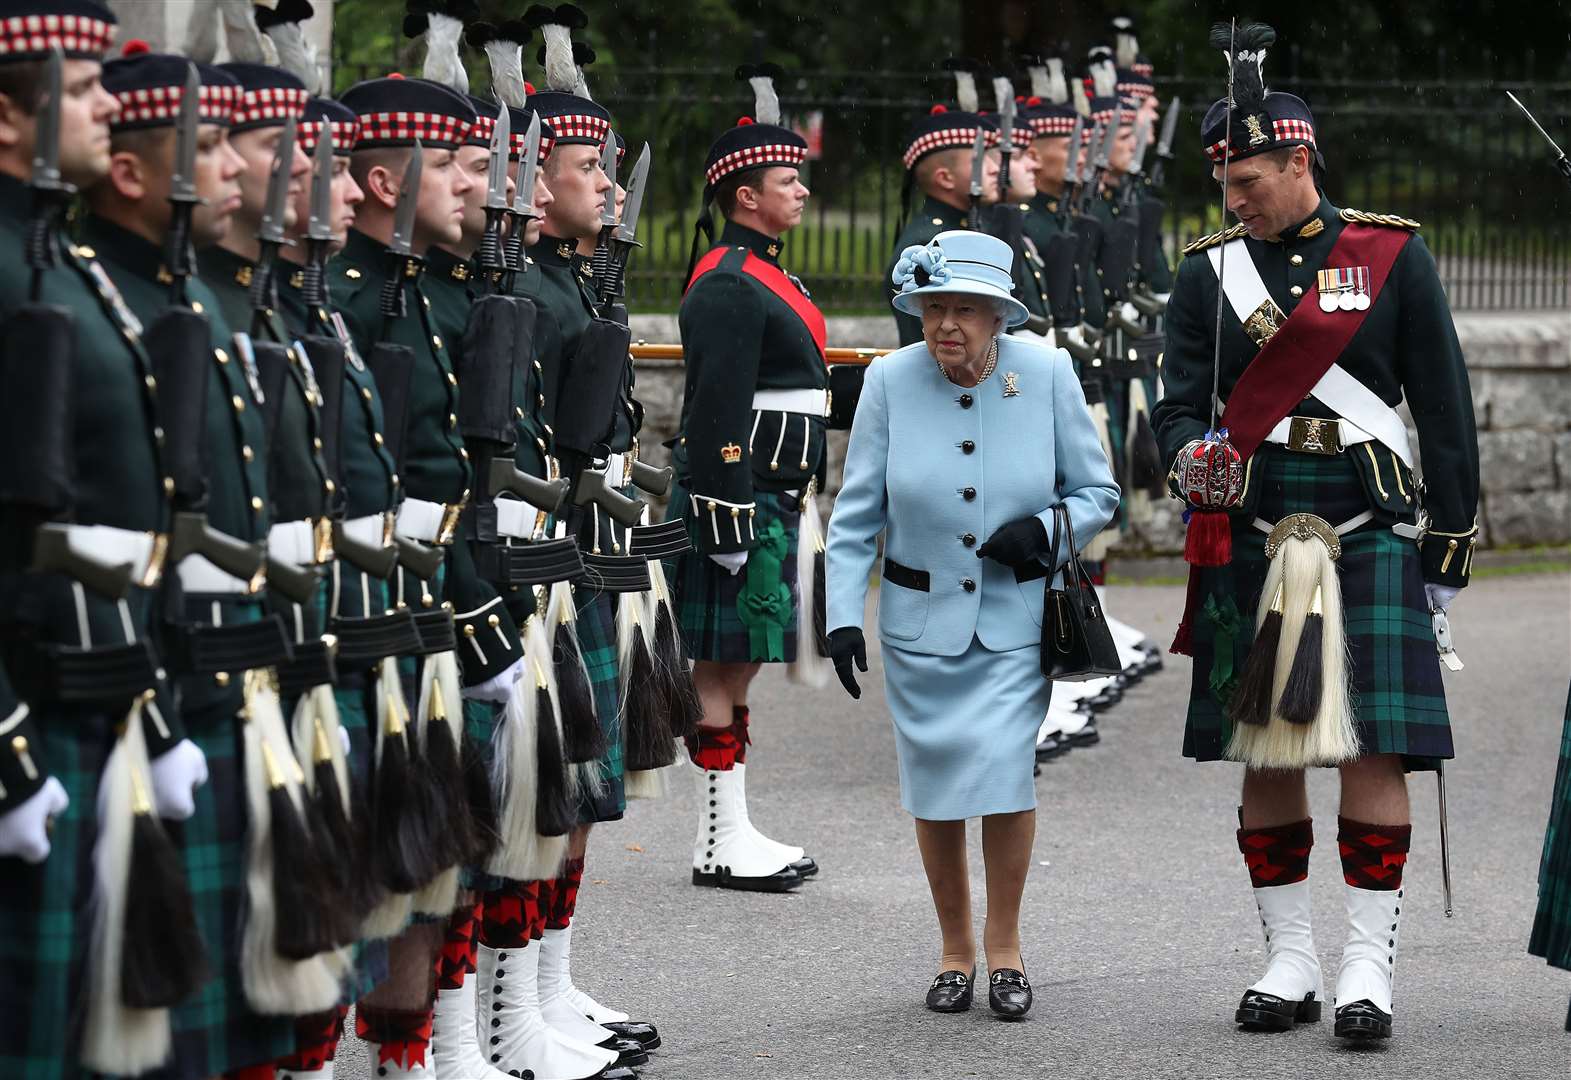 The Queen inspects the Balaklava Company, 5 Battalion The Royal Regiment of Scotland at the gates at Balmoral, as she took up summer residence in 2019 (Andrew Milligan/PA)